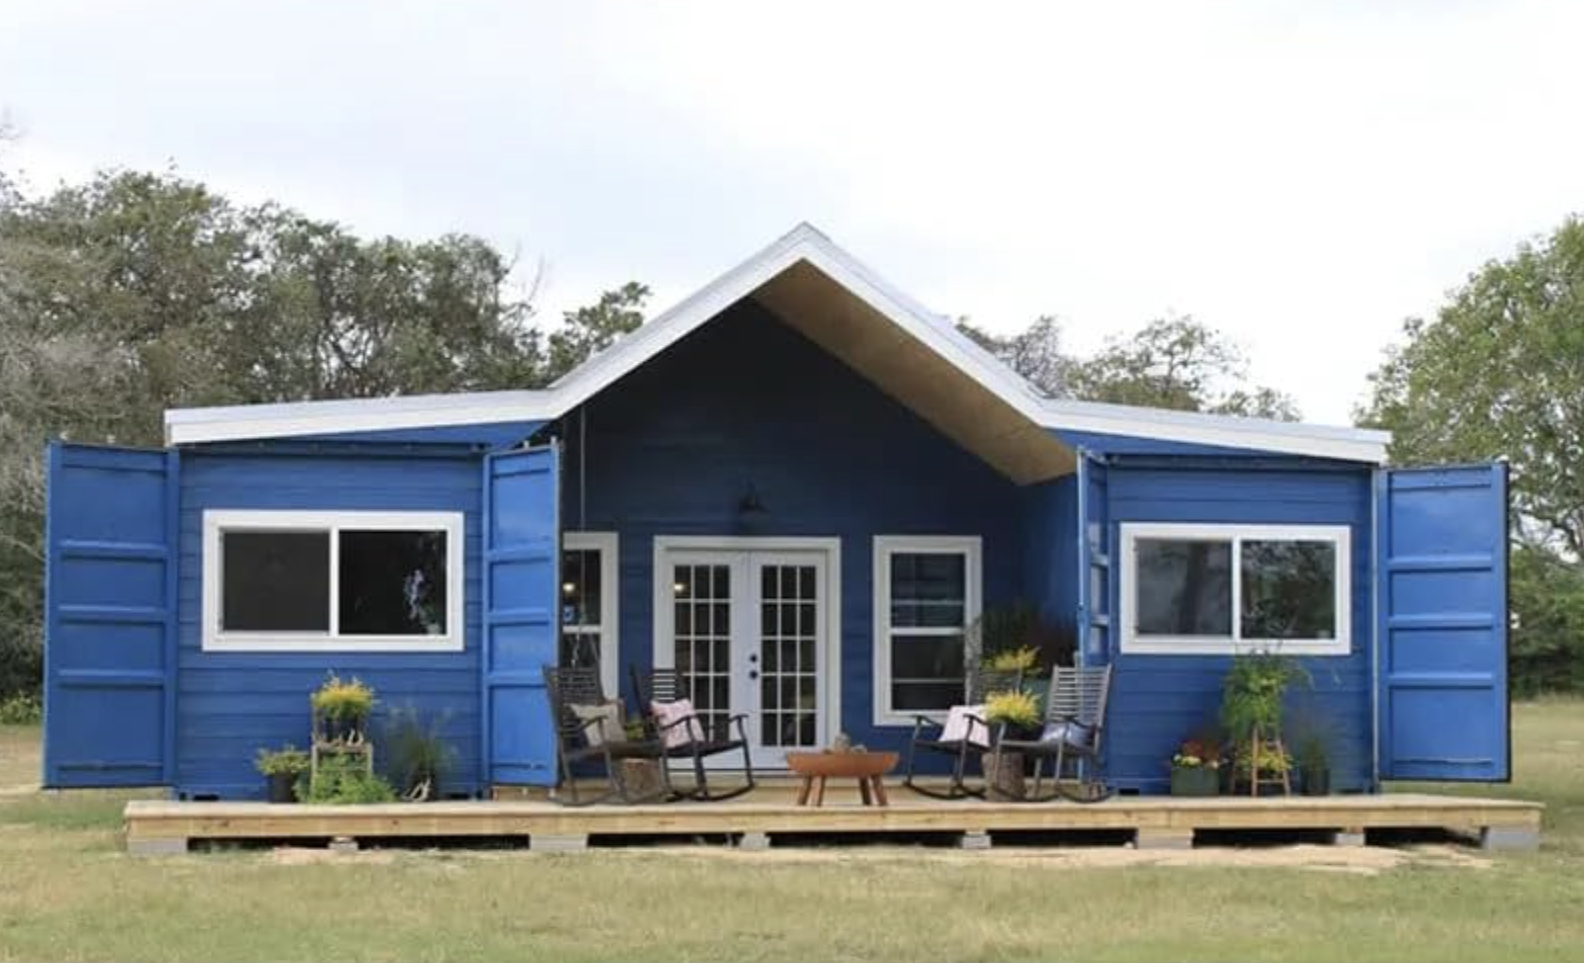 Blue tiny house with gabled roof and front deck surrounded by grass